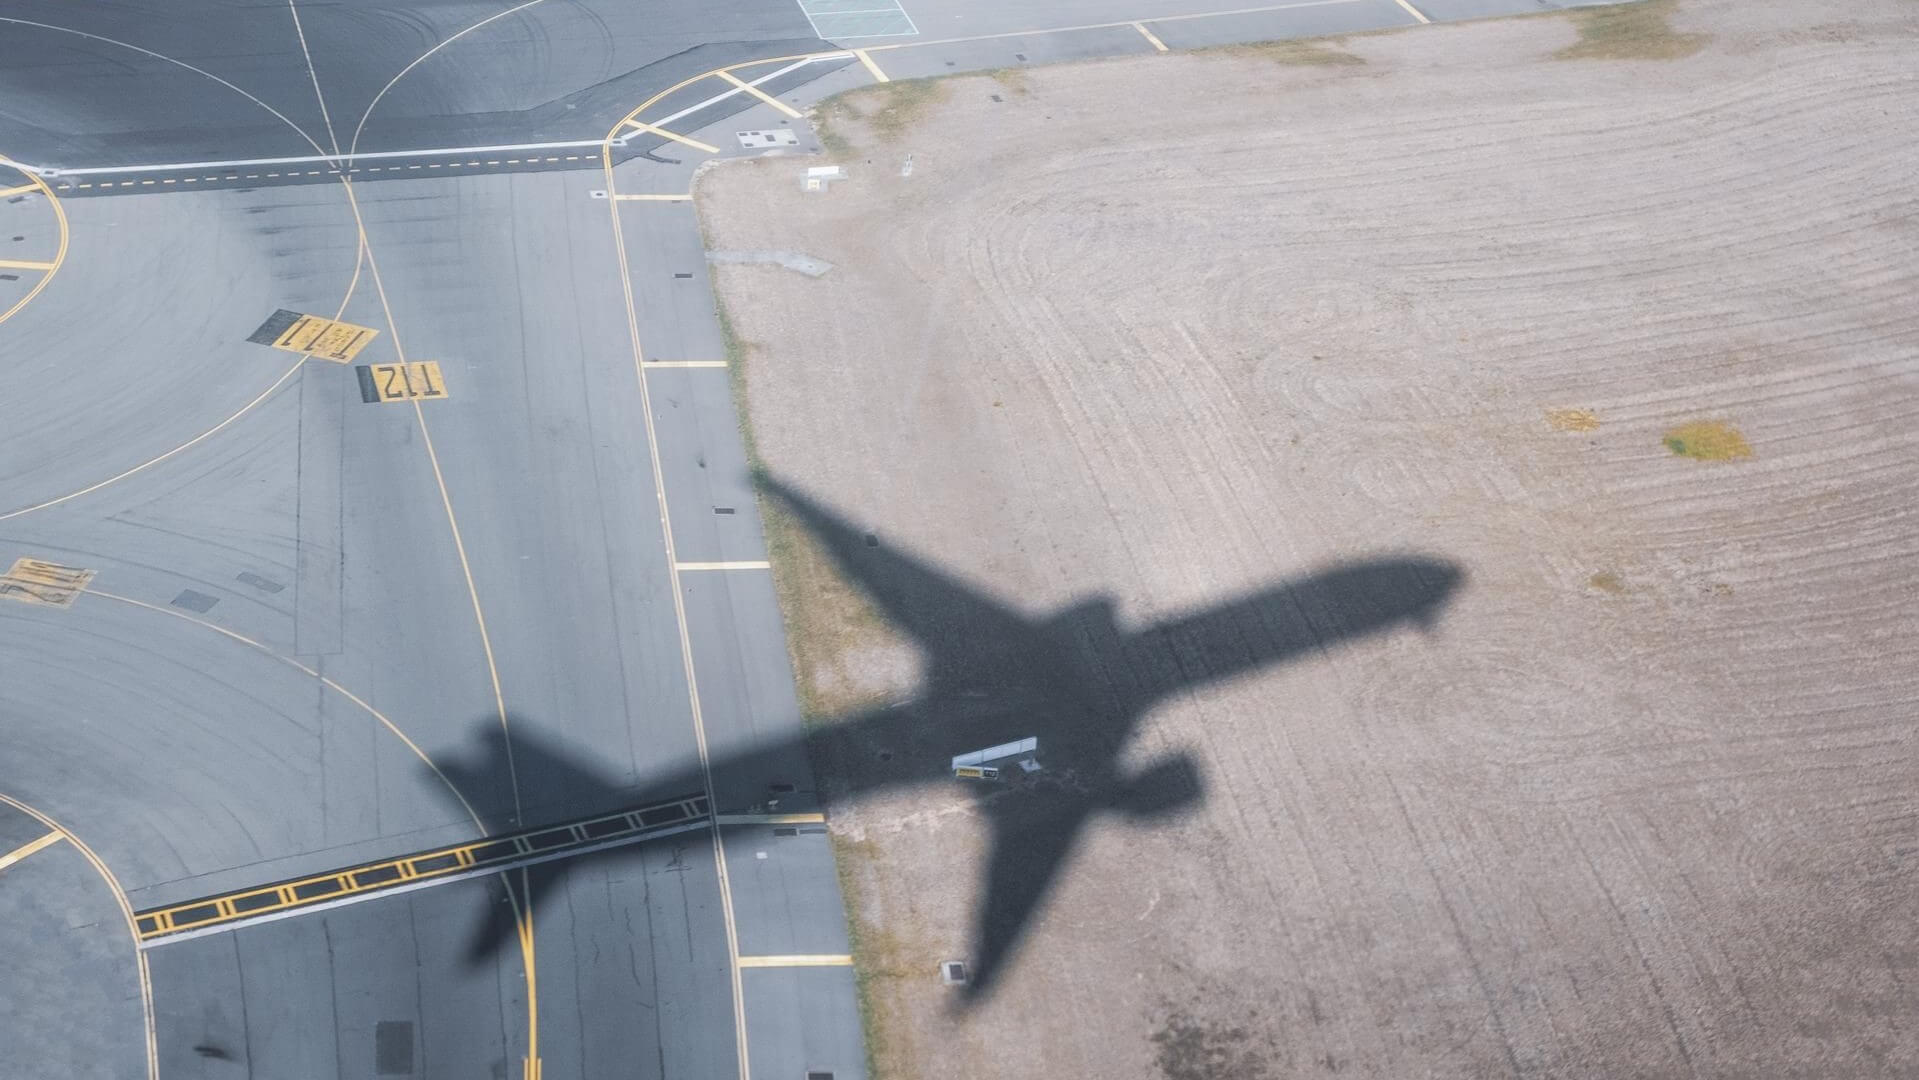 Shadow of plane flying over airport runway